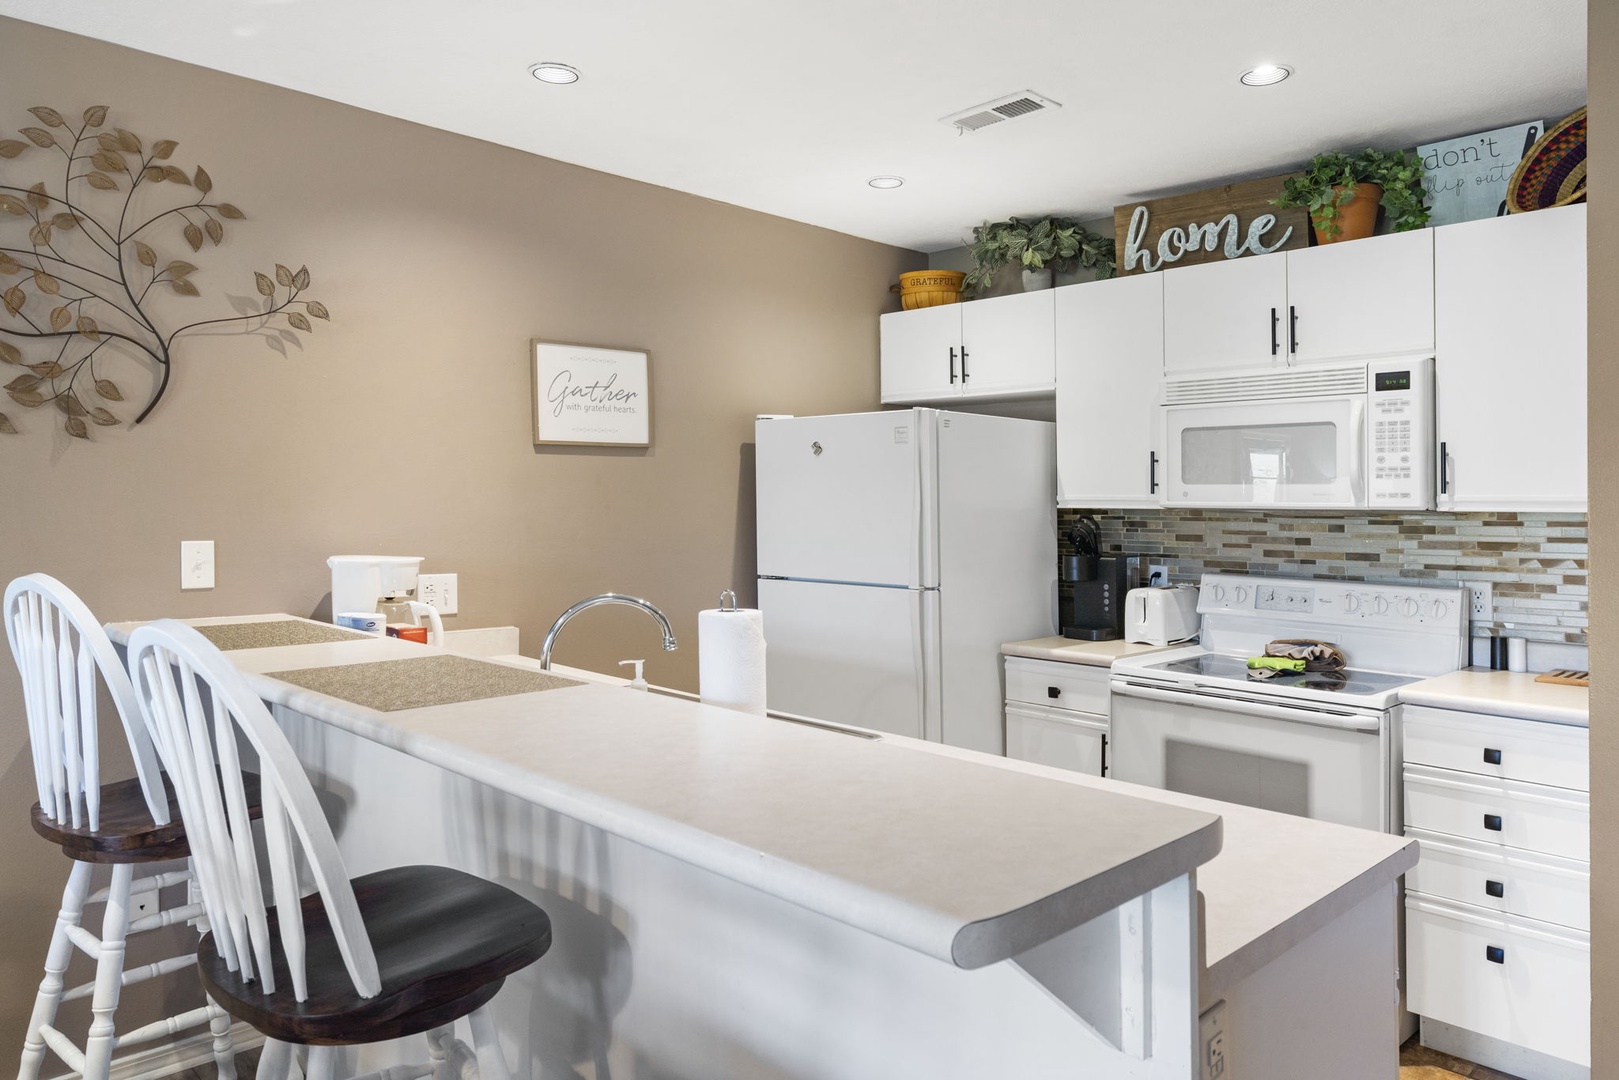 You’ll love taking morning coffee at the counter in this charming kitchen, equipped with a Keurig coffee maker